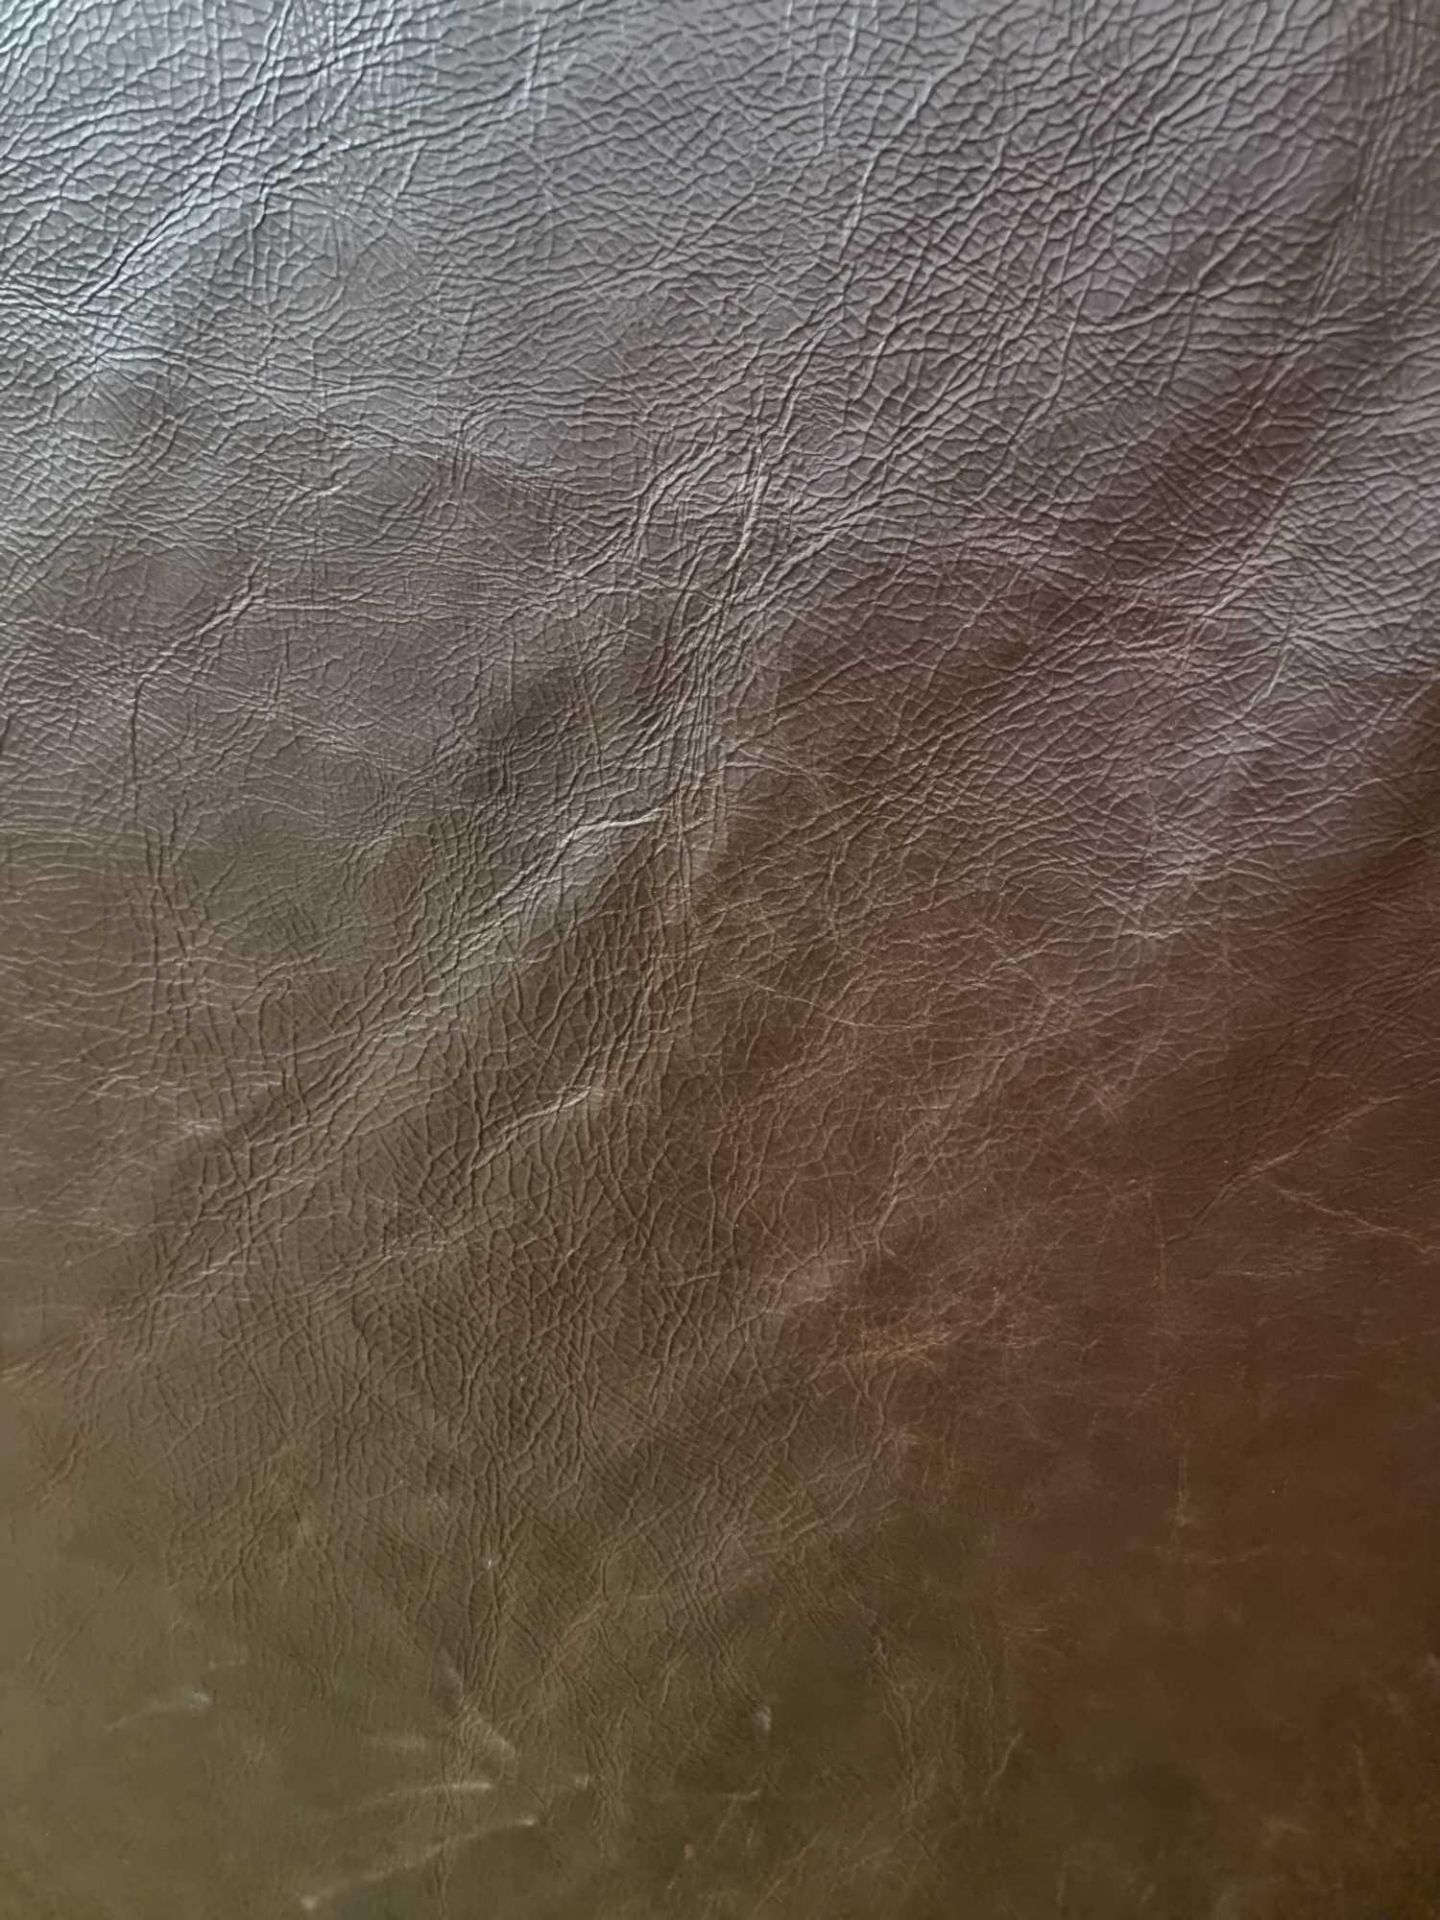 Mastrotto Hudson Chocolate Leather Hide approximately 3.52mÂ² 2.2 x 1.6cm - Image 2 of 2